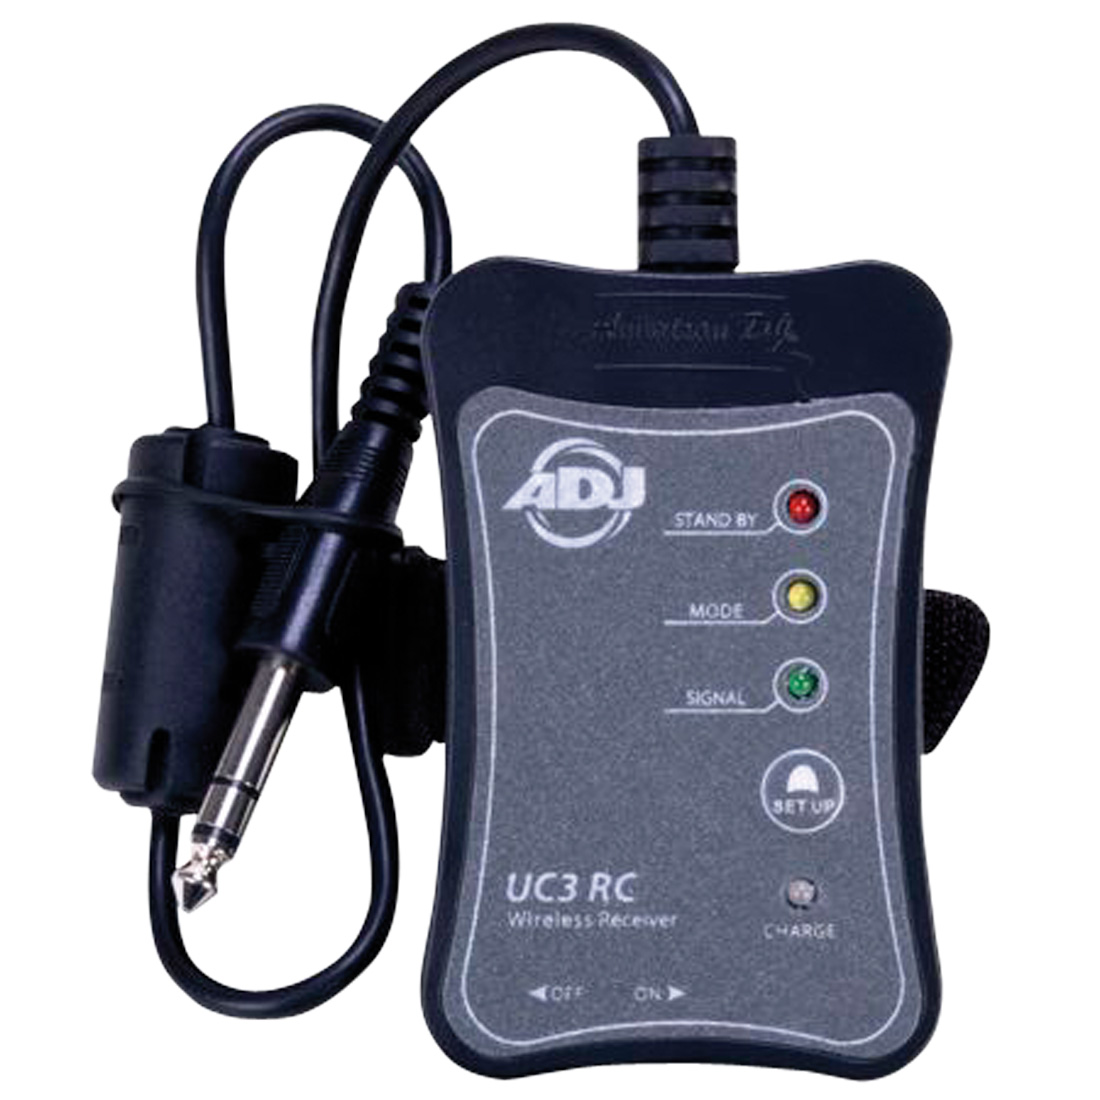 UC3 RC Receiver